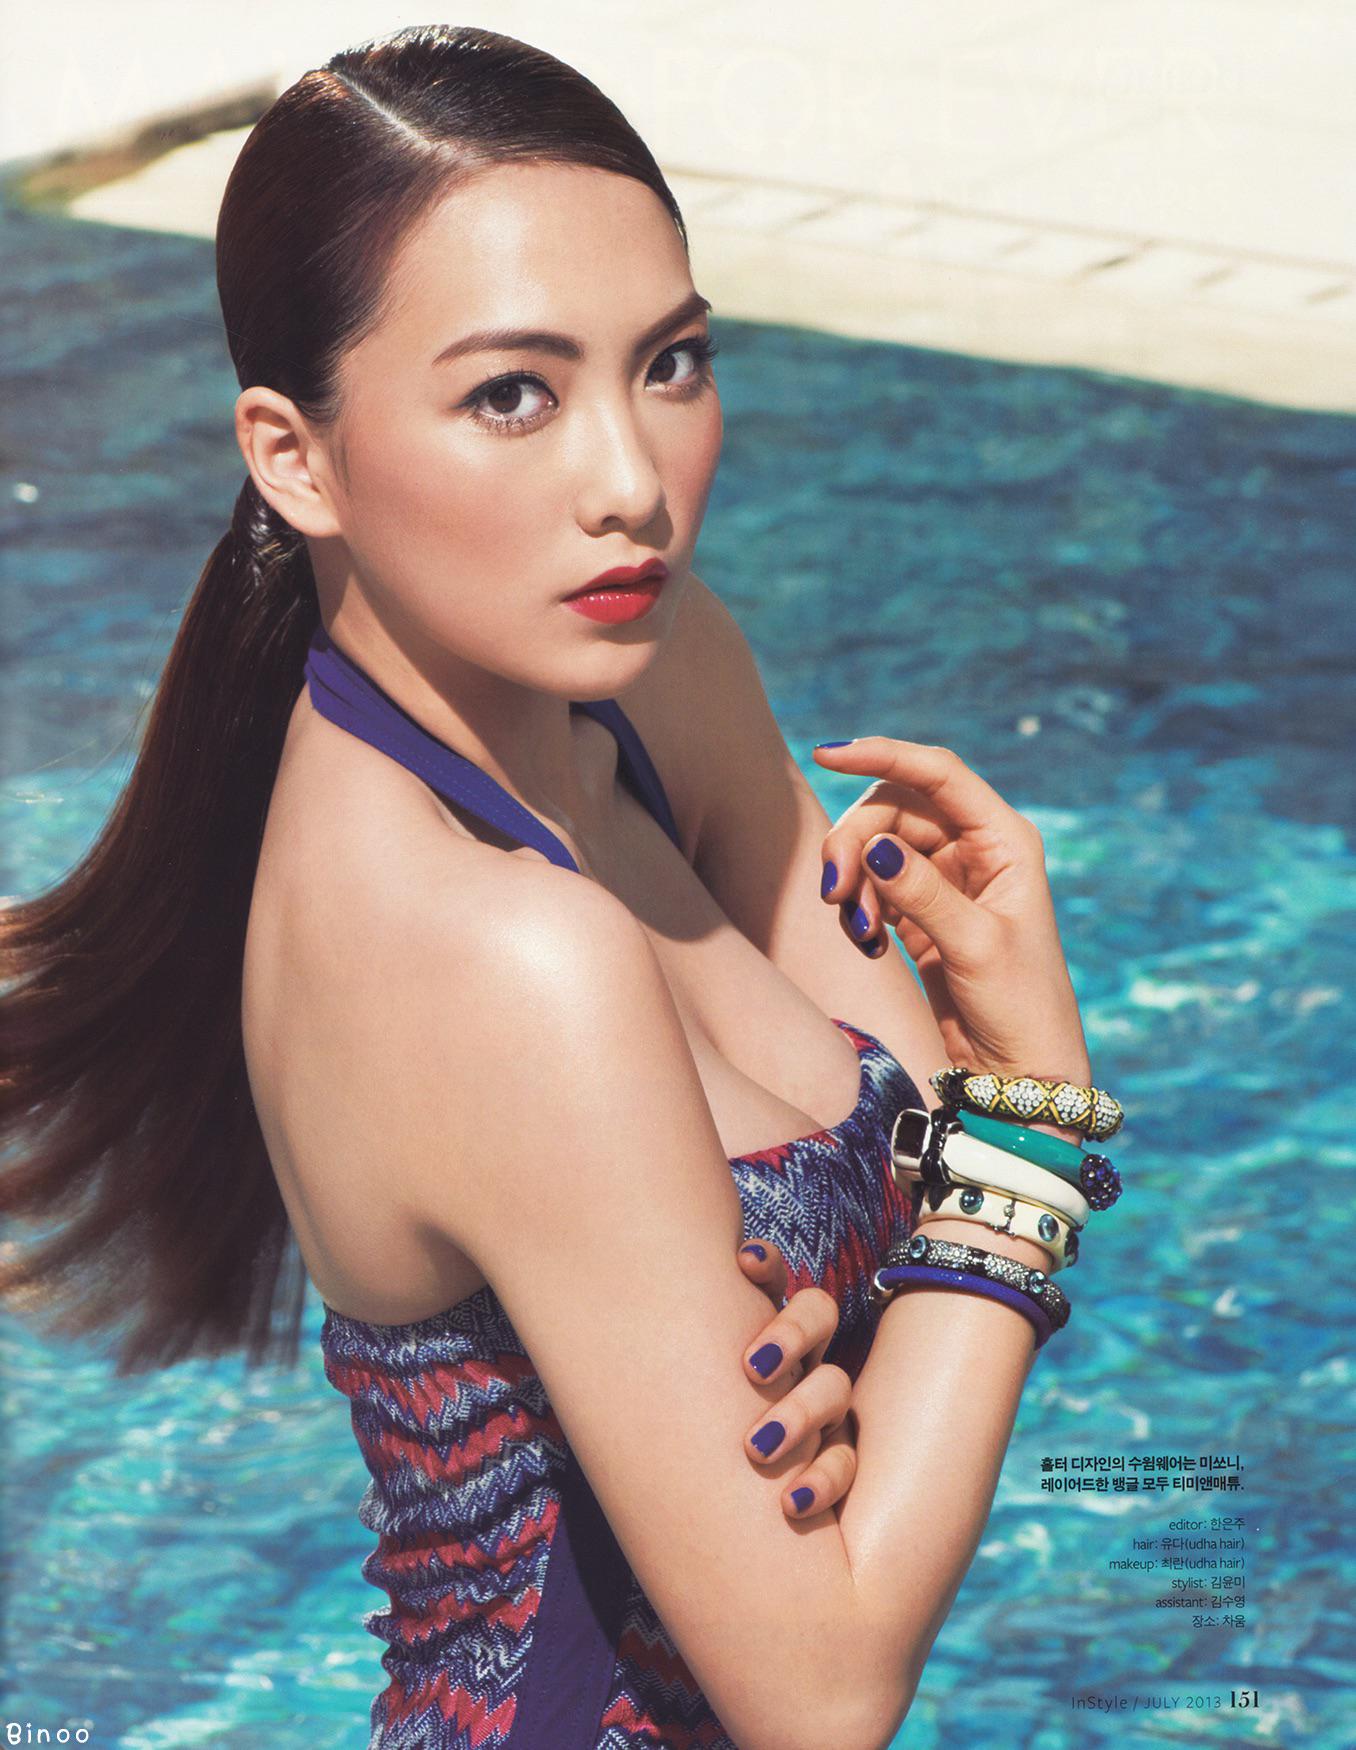 One sheet of glammer breastbone collected by KARA's Kang Jiyoung Swimming Pool. High definition.